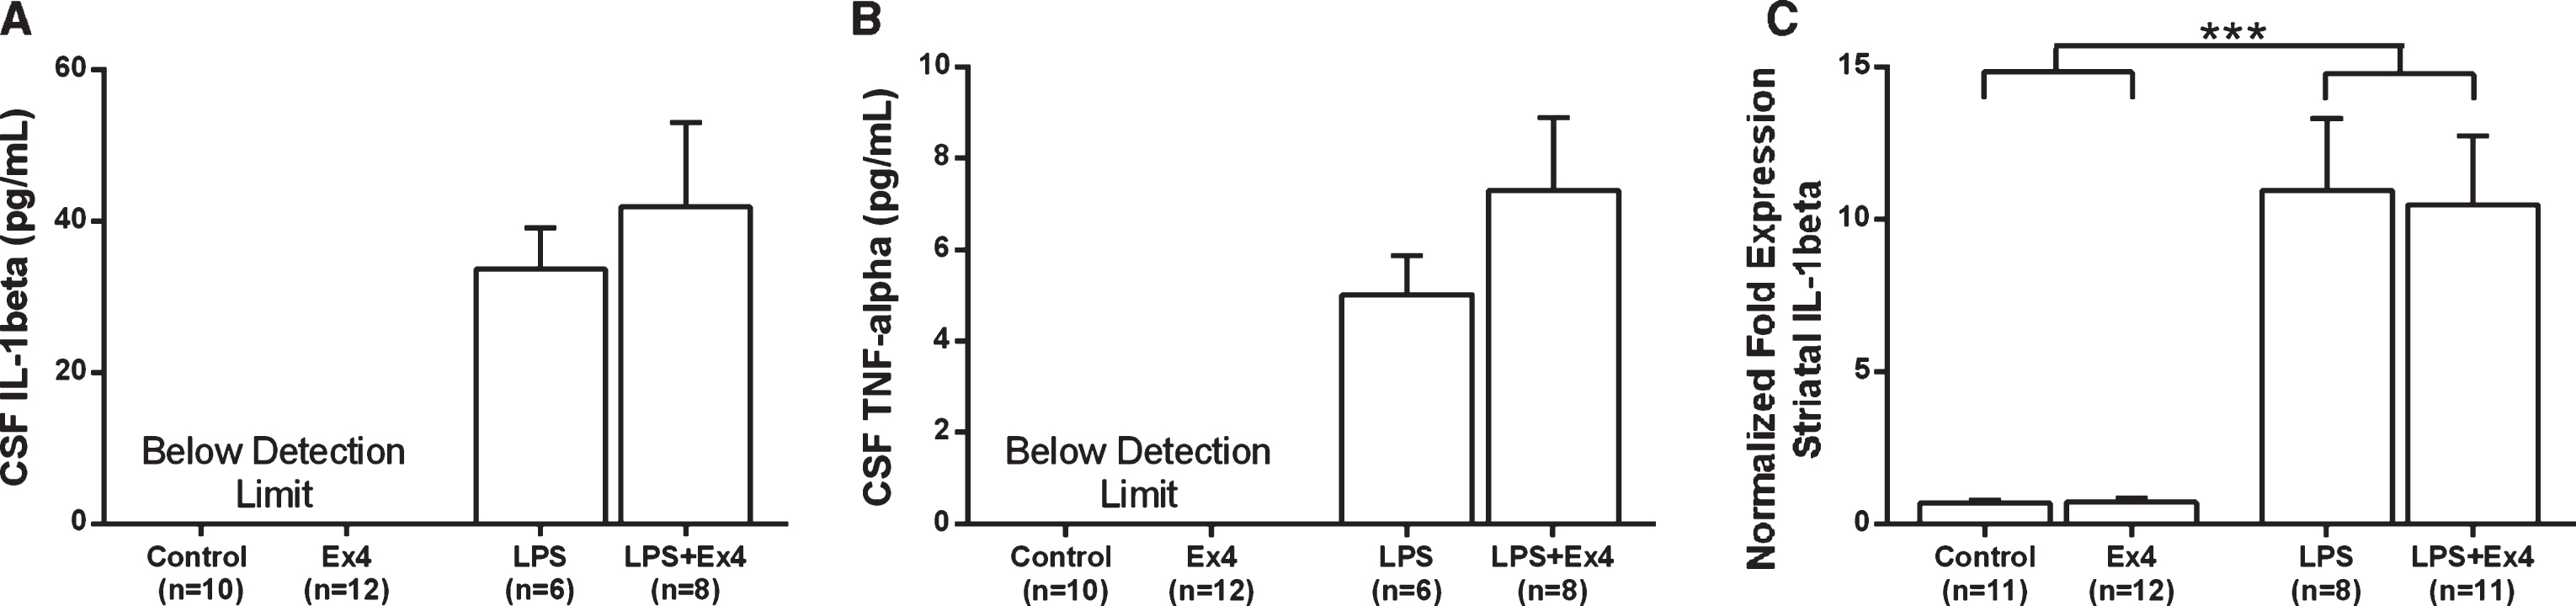 (A-B) The levels of cytokines in CSF (pg/mL). The LPS-treated rats exhibited higher levels IL-1β (A) and TNF-α (B), but exendin-4 treatment had no effect on cytokine levels (Student’s t-tests, NS). Non-LPS treated rats were below detection limit. CSF from six animals were not used because of insufficient amounts (n = 1 [Control], n = 2 [LPS], n = 3 [LPS+Ex4]). (C) The mRNA expression of IL-1β in the striatum. The IL-1β expression was higher in LPS treated rats but was not affected by exendin-4 treatment (two-way ANOVA, LPS effect, F(1,38) = 44.04, p < 0.001). Bars represent the mean±SEM, ***p < 0.001.